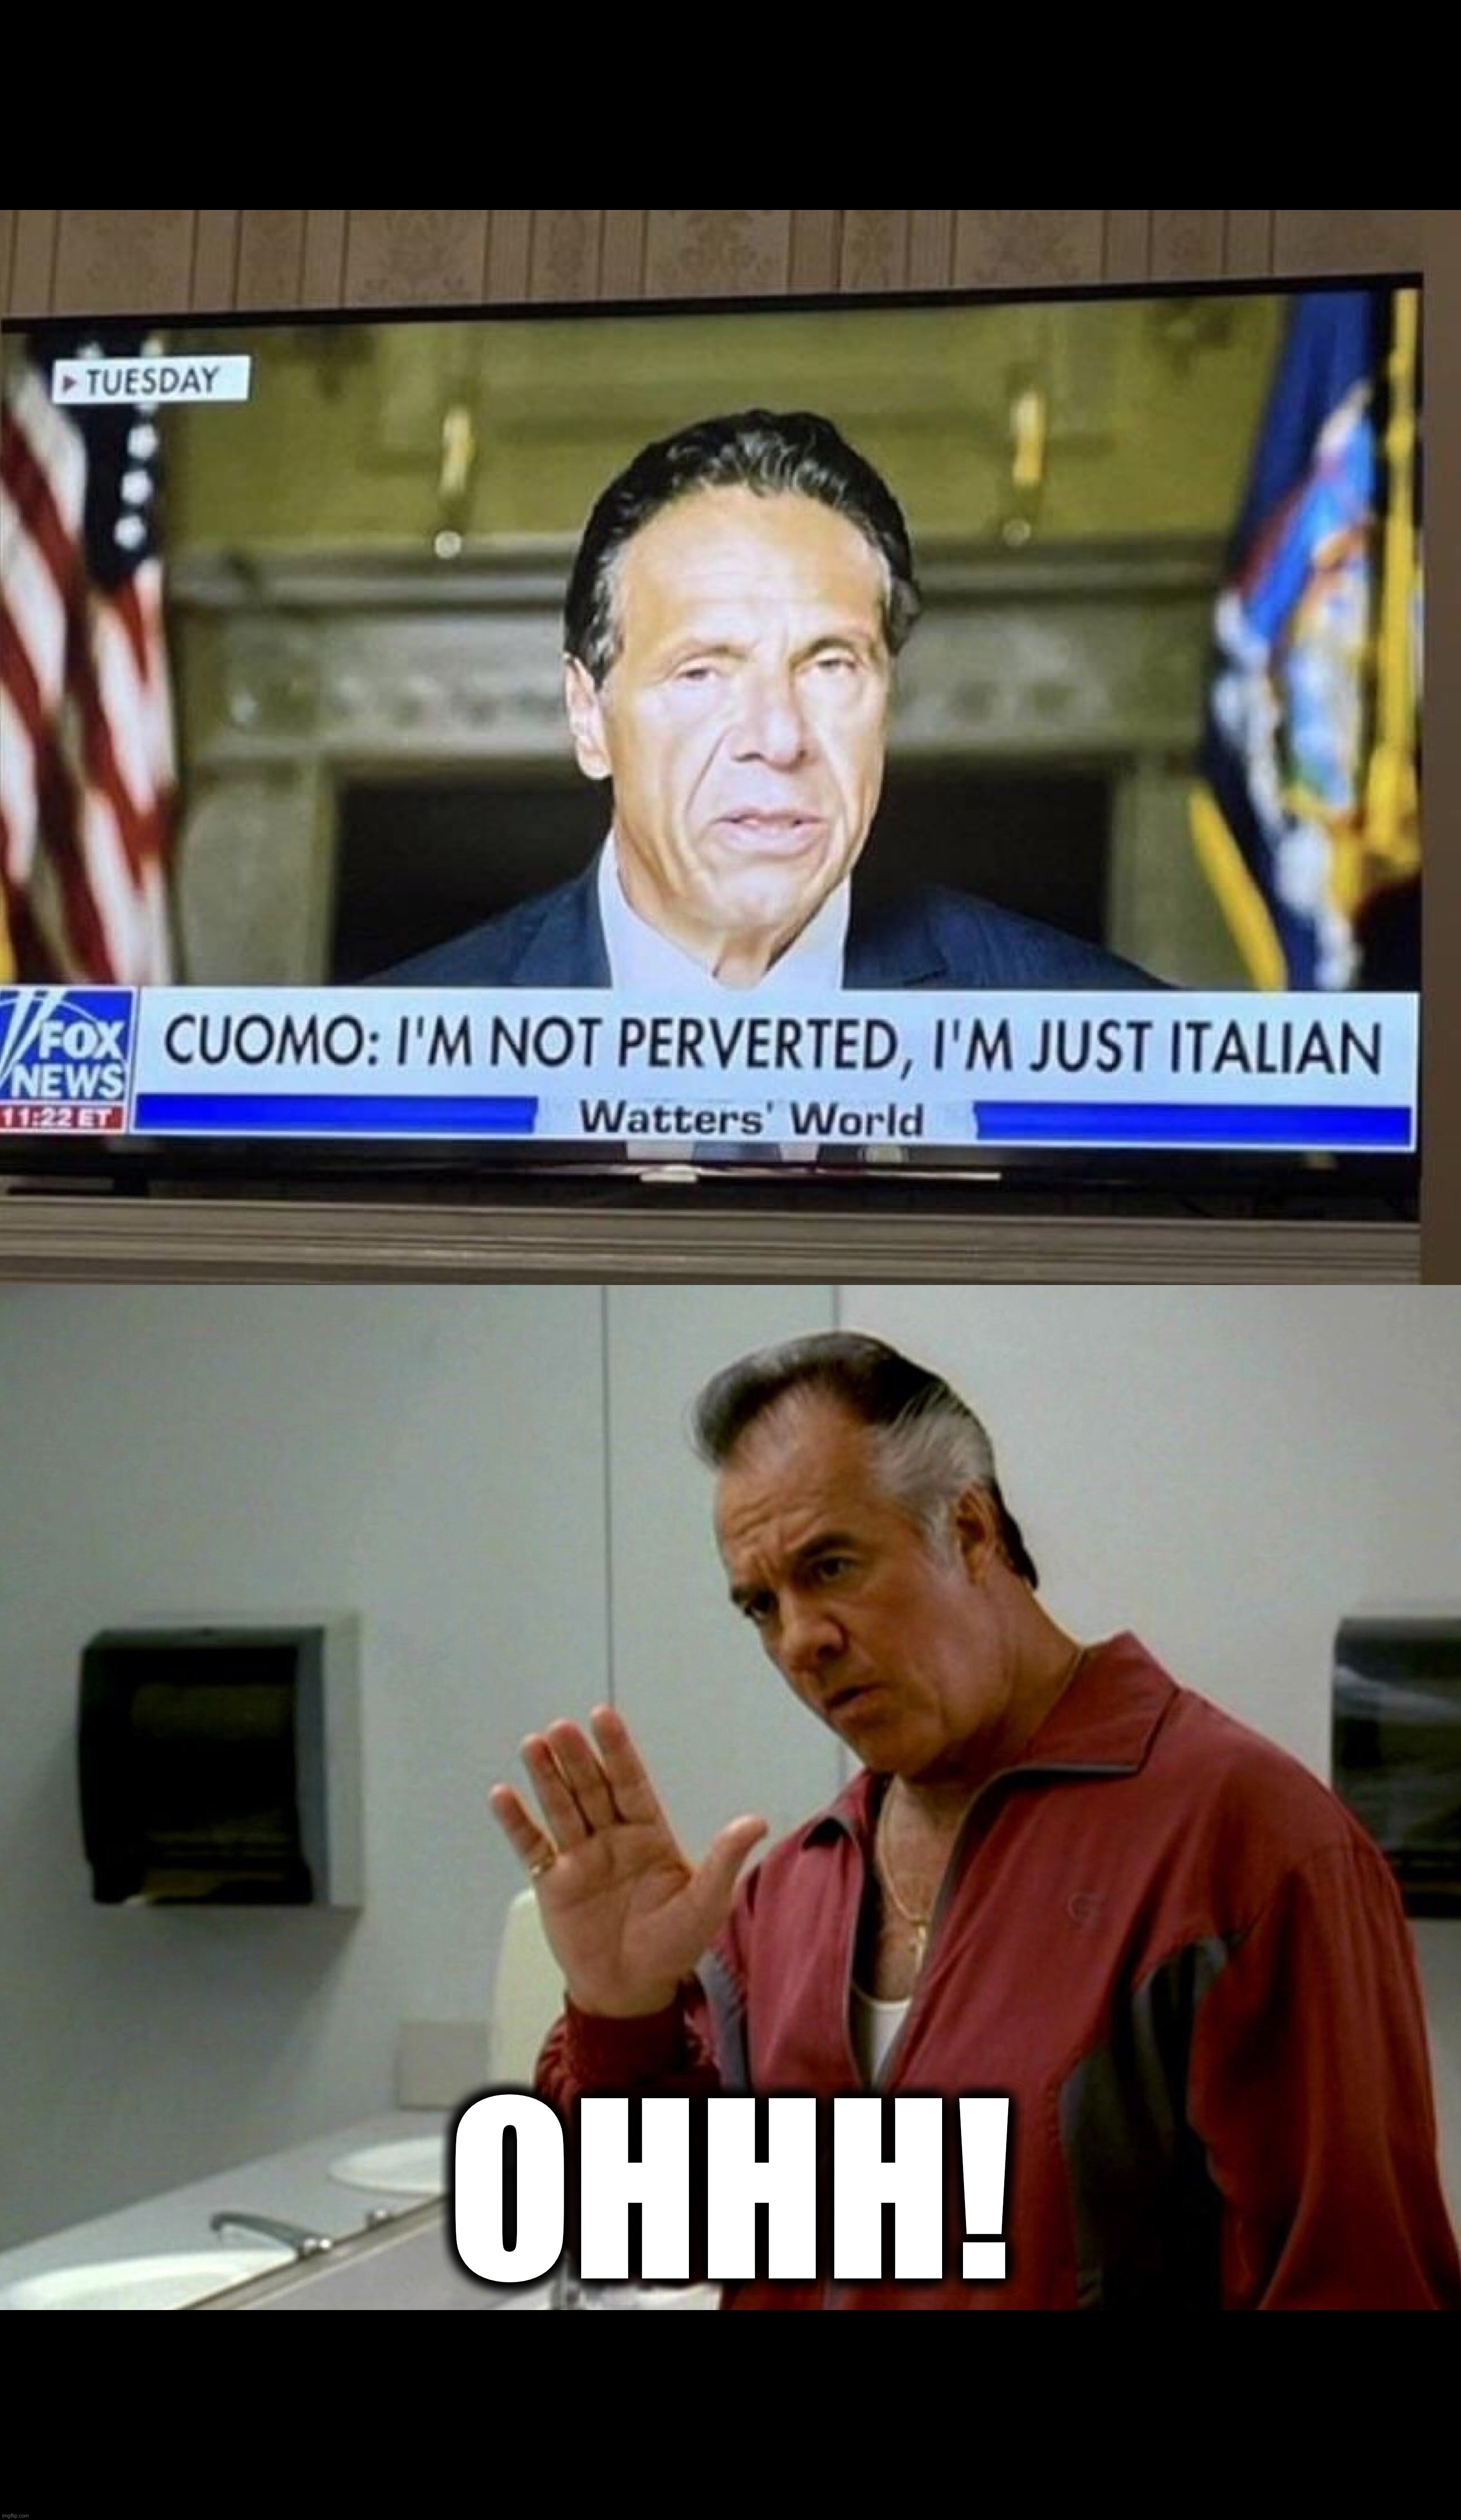 OHHH! | image tagged in andrew cuomo,cuomo,new york,italy,italian | made w/ Imgflip meme maker